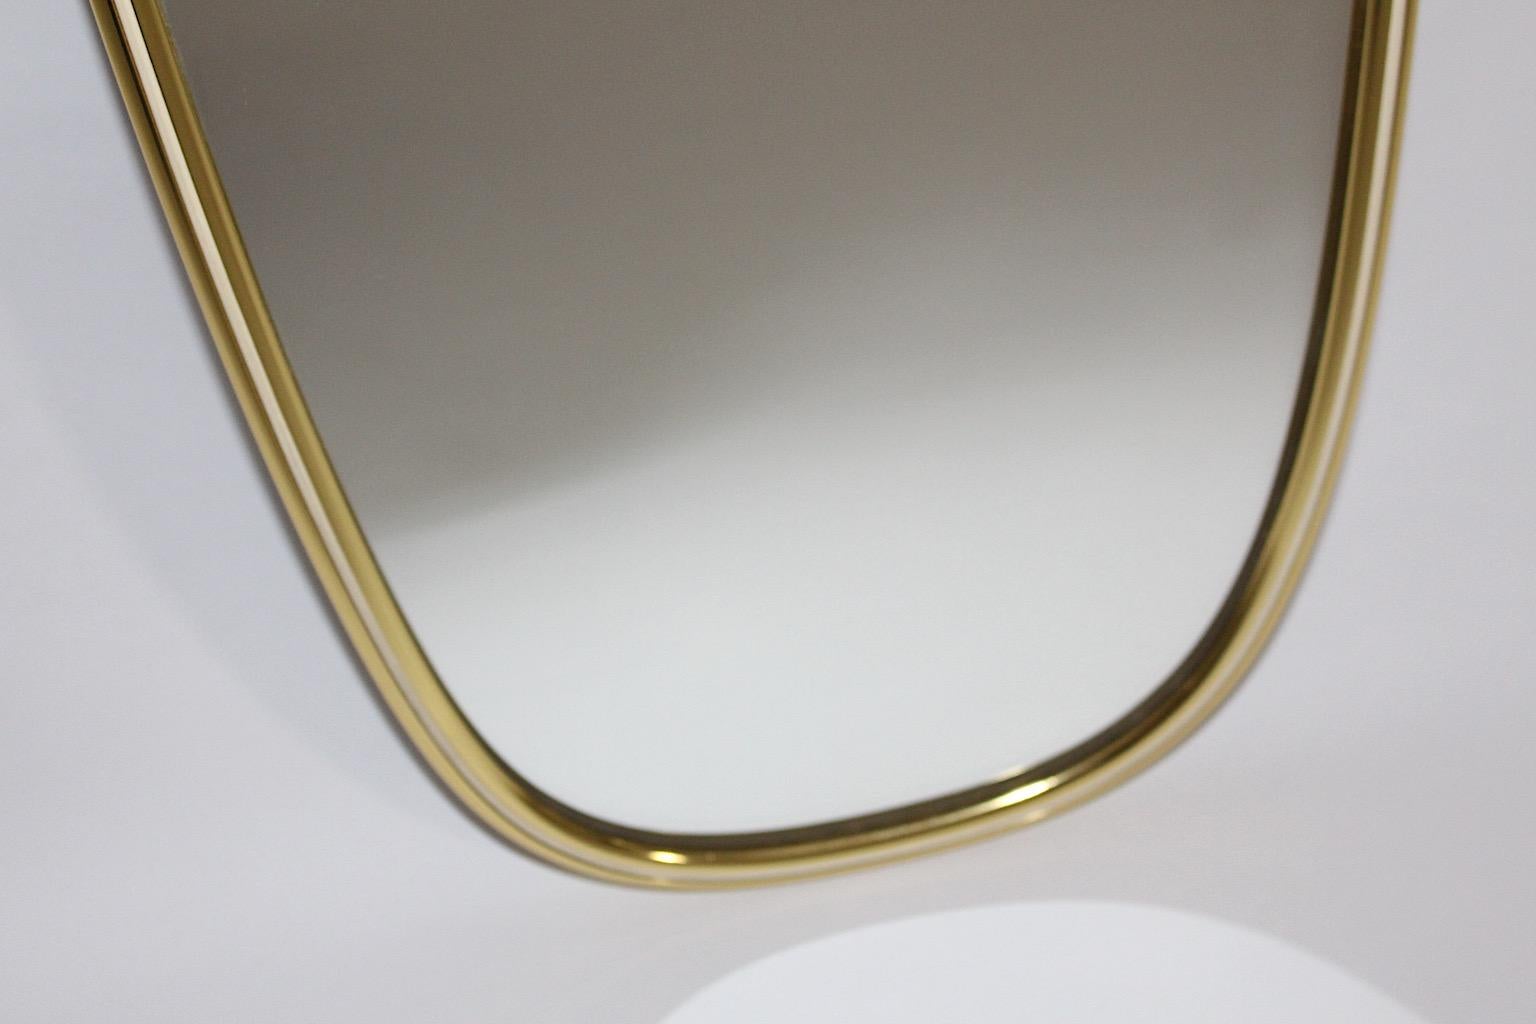 Mid-Century Modern Vintage Brass Oval Wall Mirror, 1960s, Germany For Sale 1